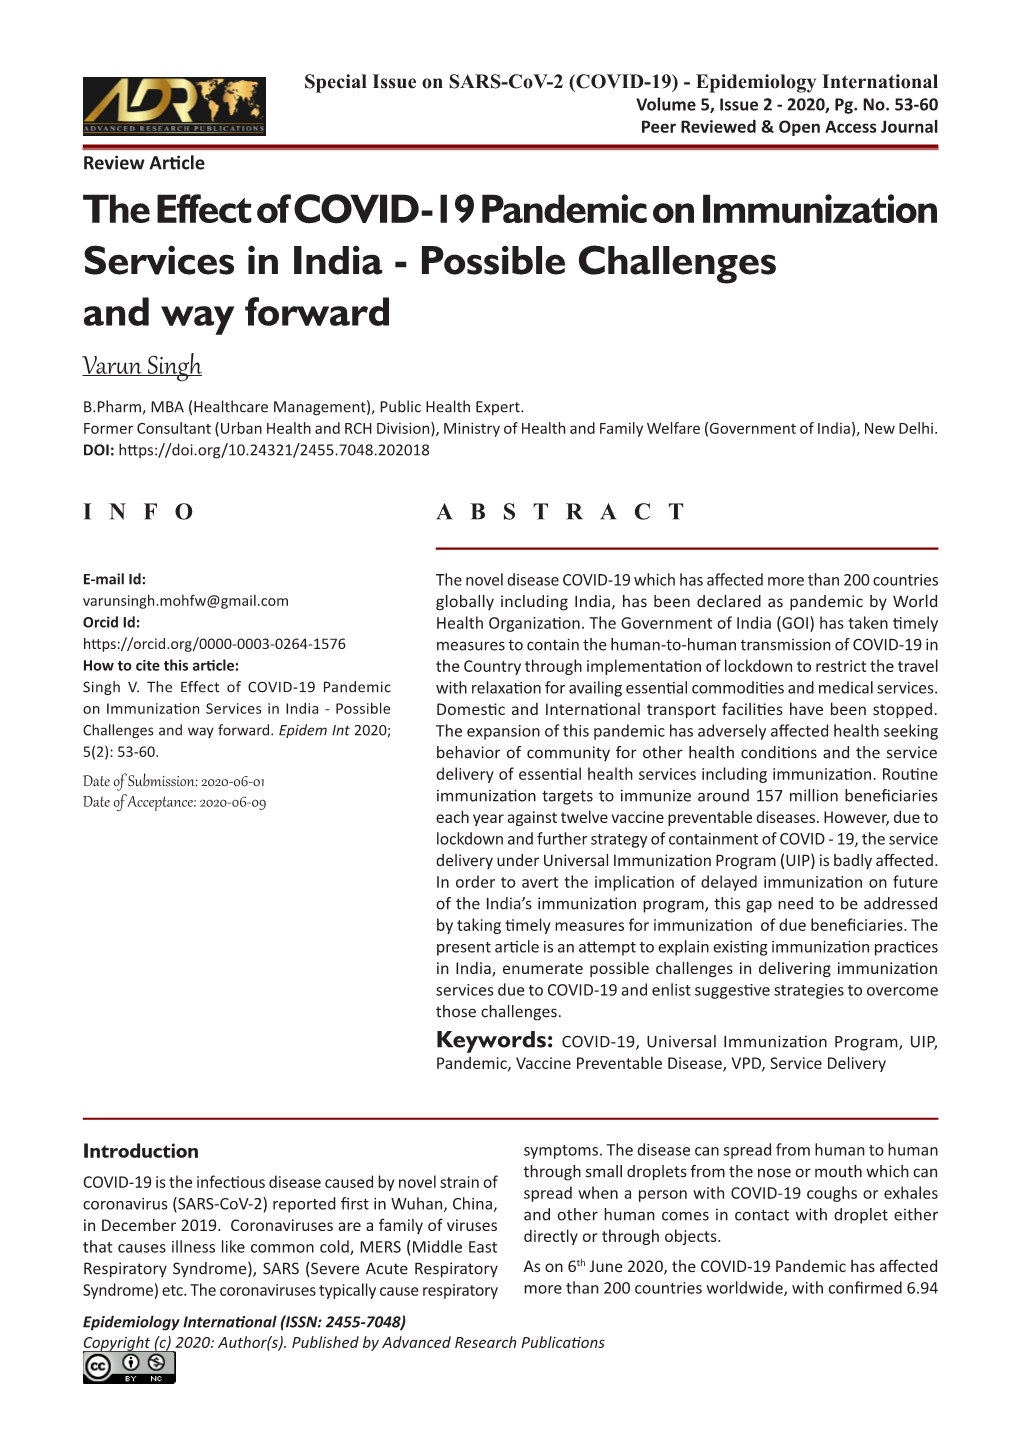 The Effect of COVID-19 Pandemic on Immunization Services in India